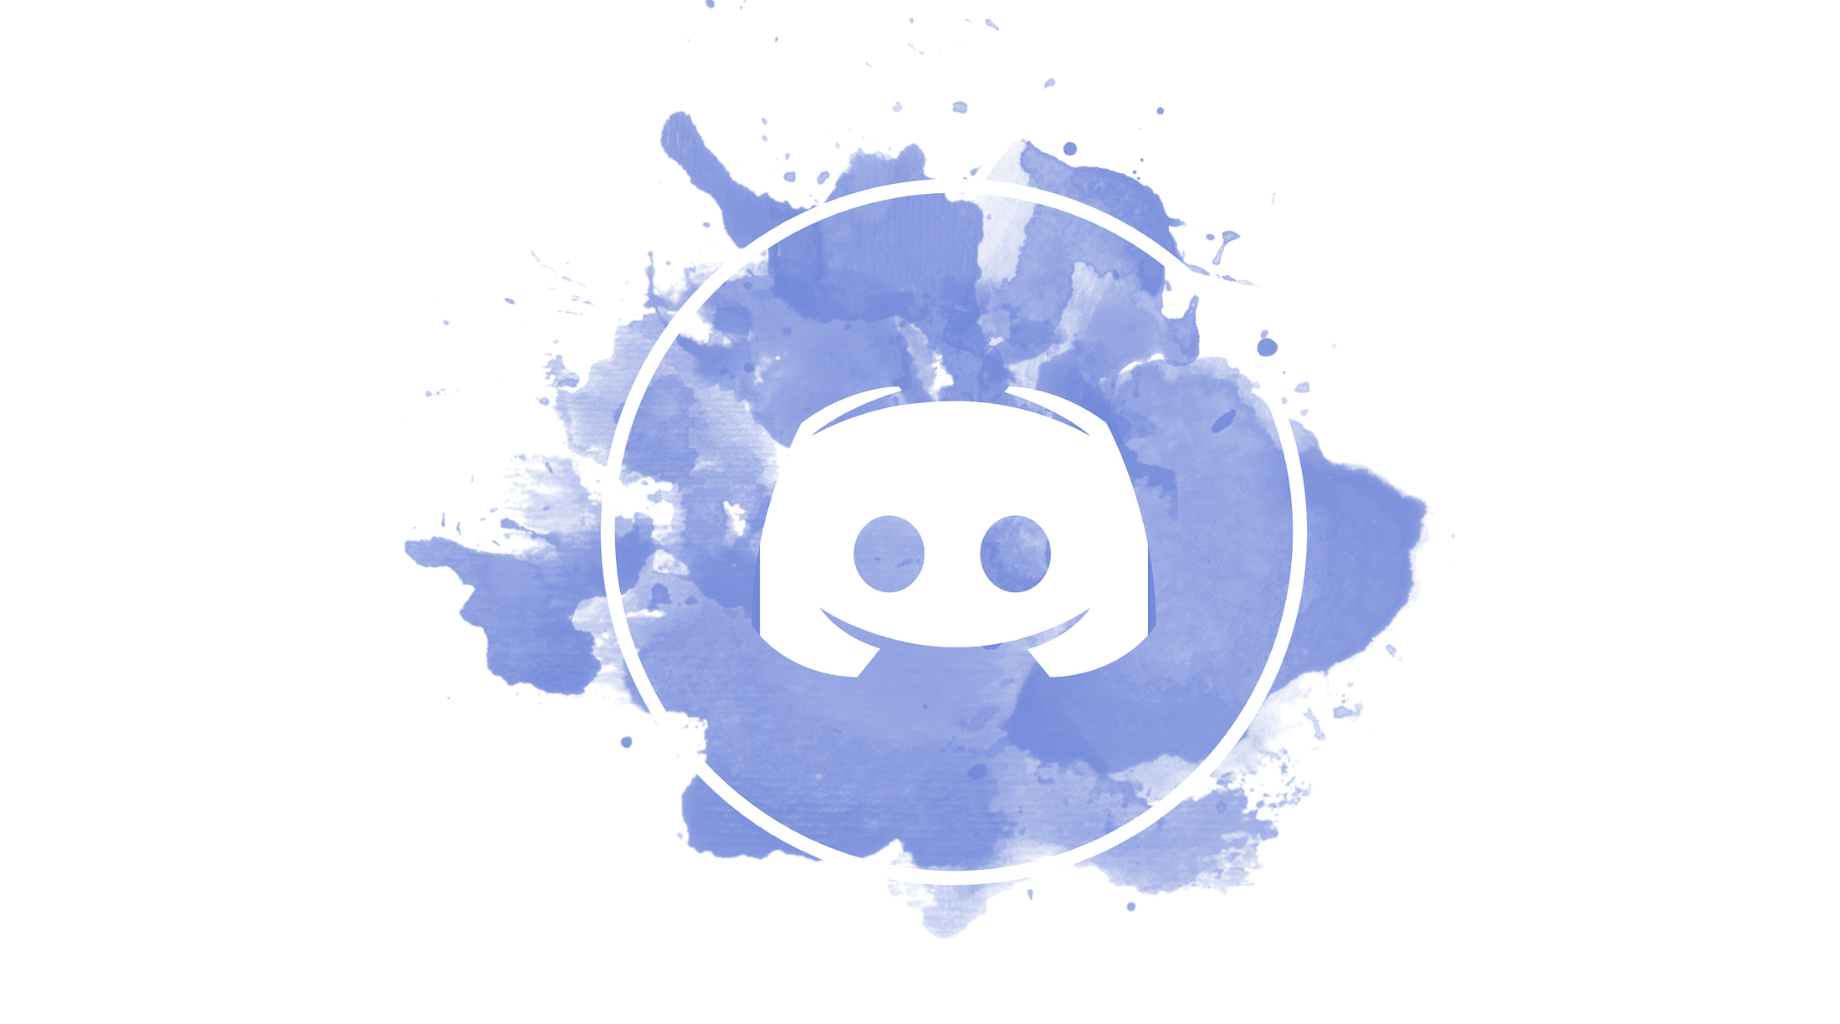 Discord Aesthetic Logo Wallpapers